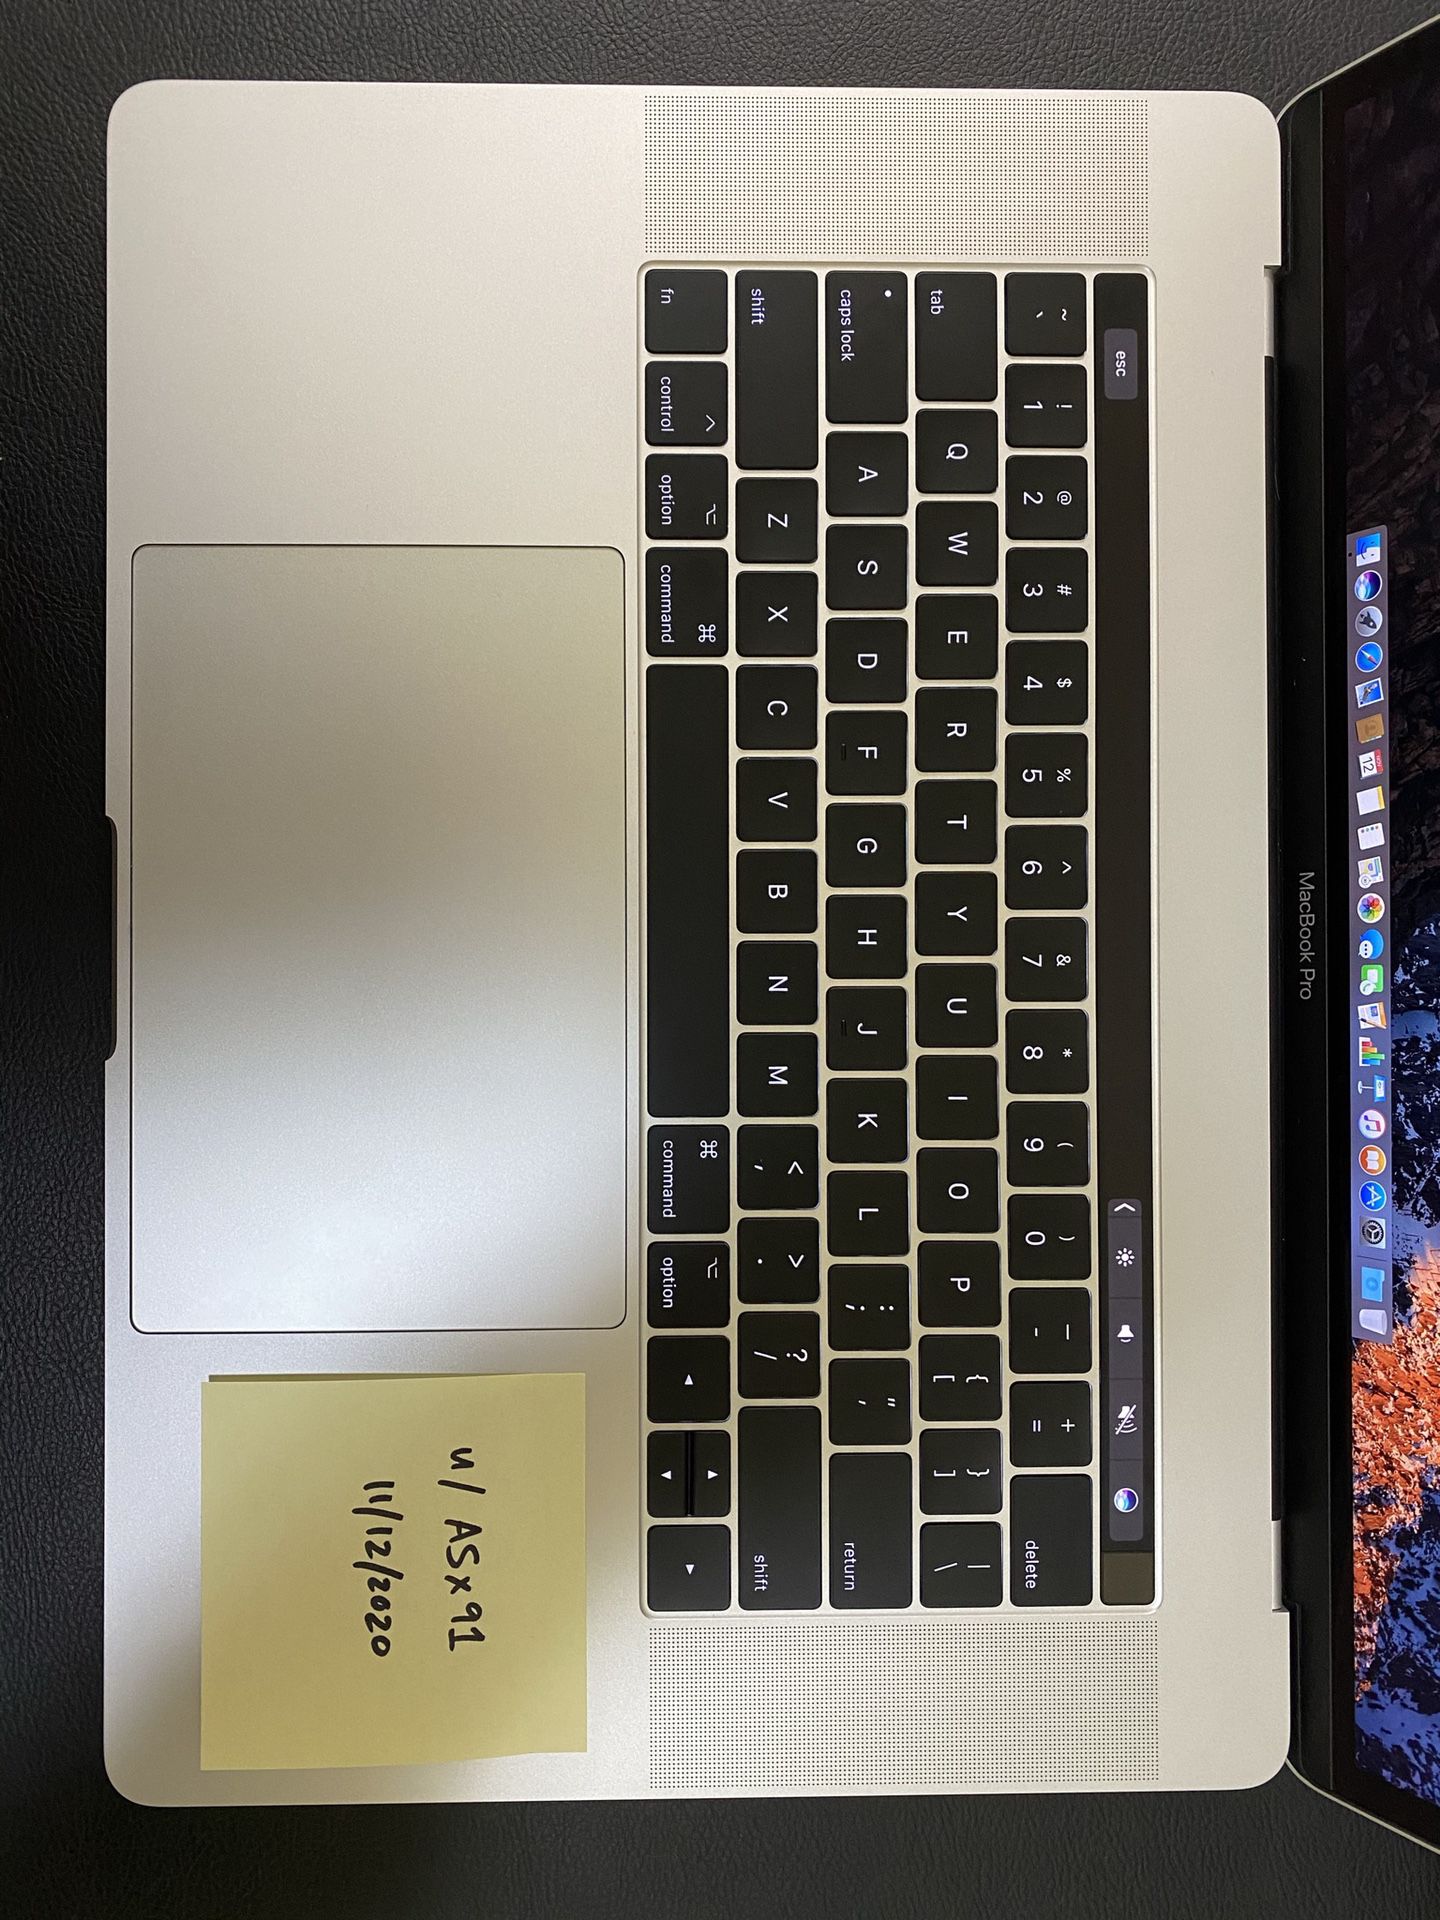 2016 MacBook Pro 15” Touch Bar 2.6GHz, i7, 16GB RAM, Excellent Condition